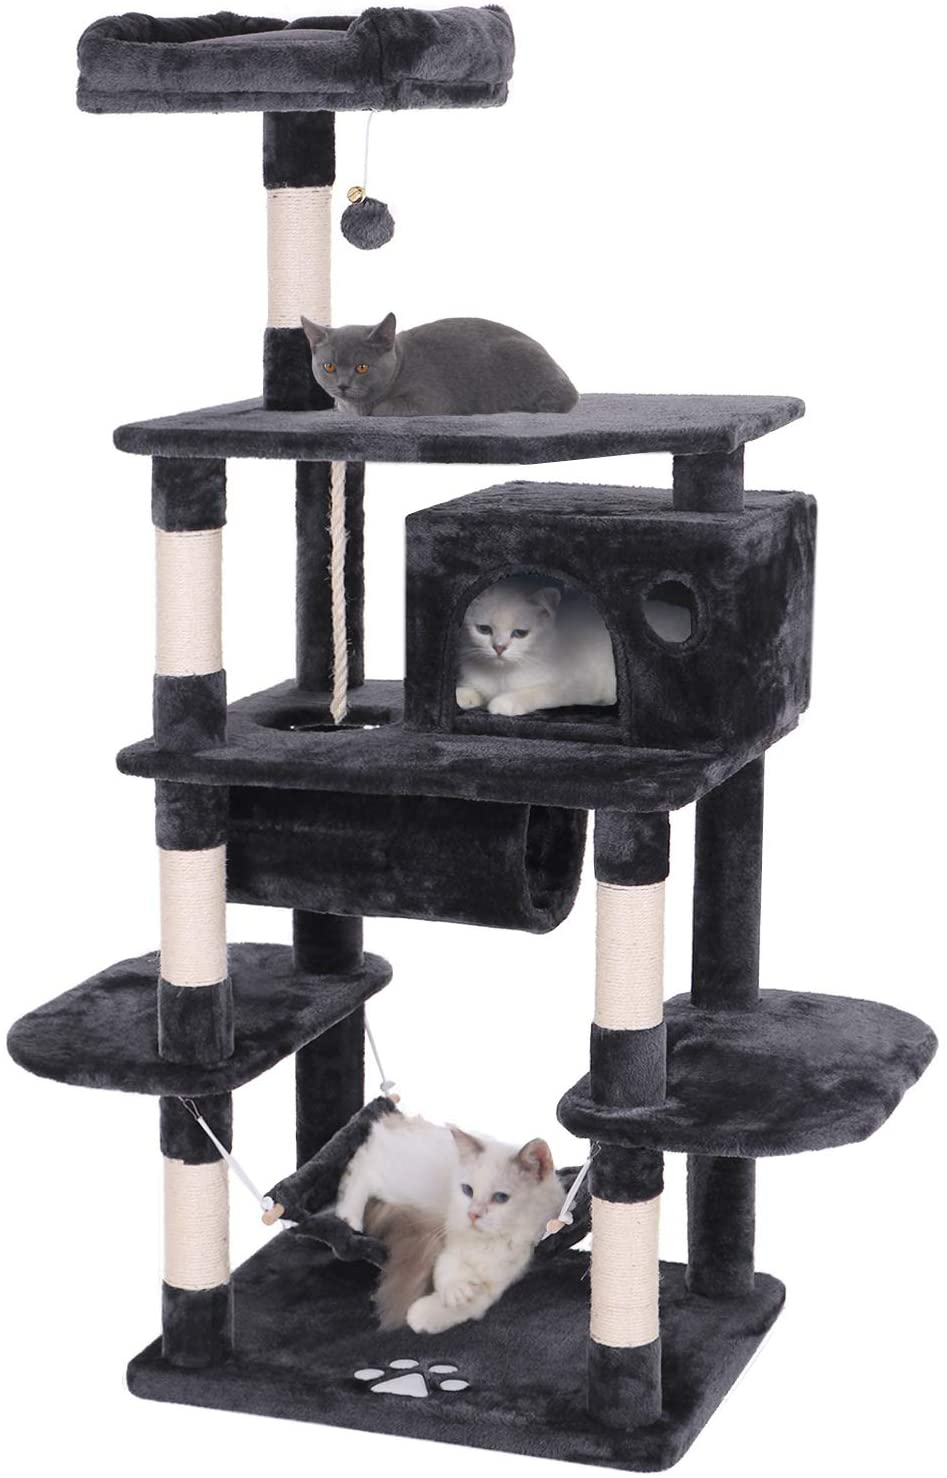 BEWISHOME Cat Tree Condo Furniture Kitten Activity Tower Pet Kitty Play House with Scratching Posts Perch Hammock Tunnel MMJ02